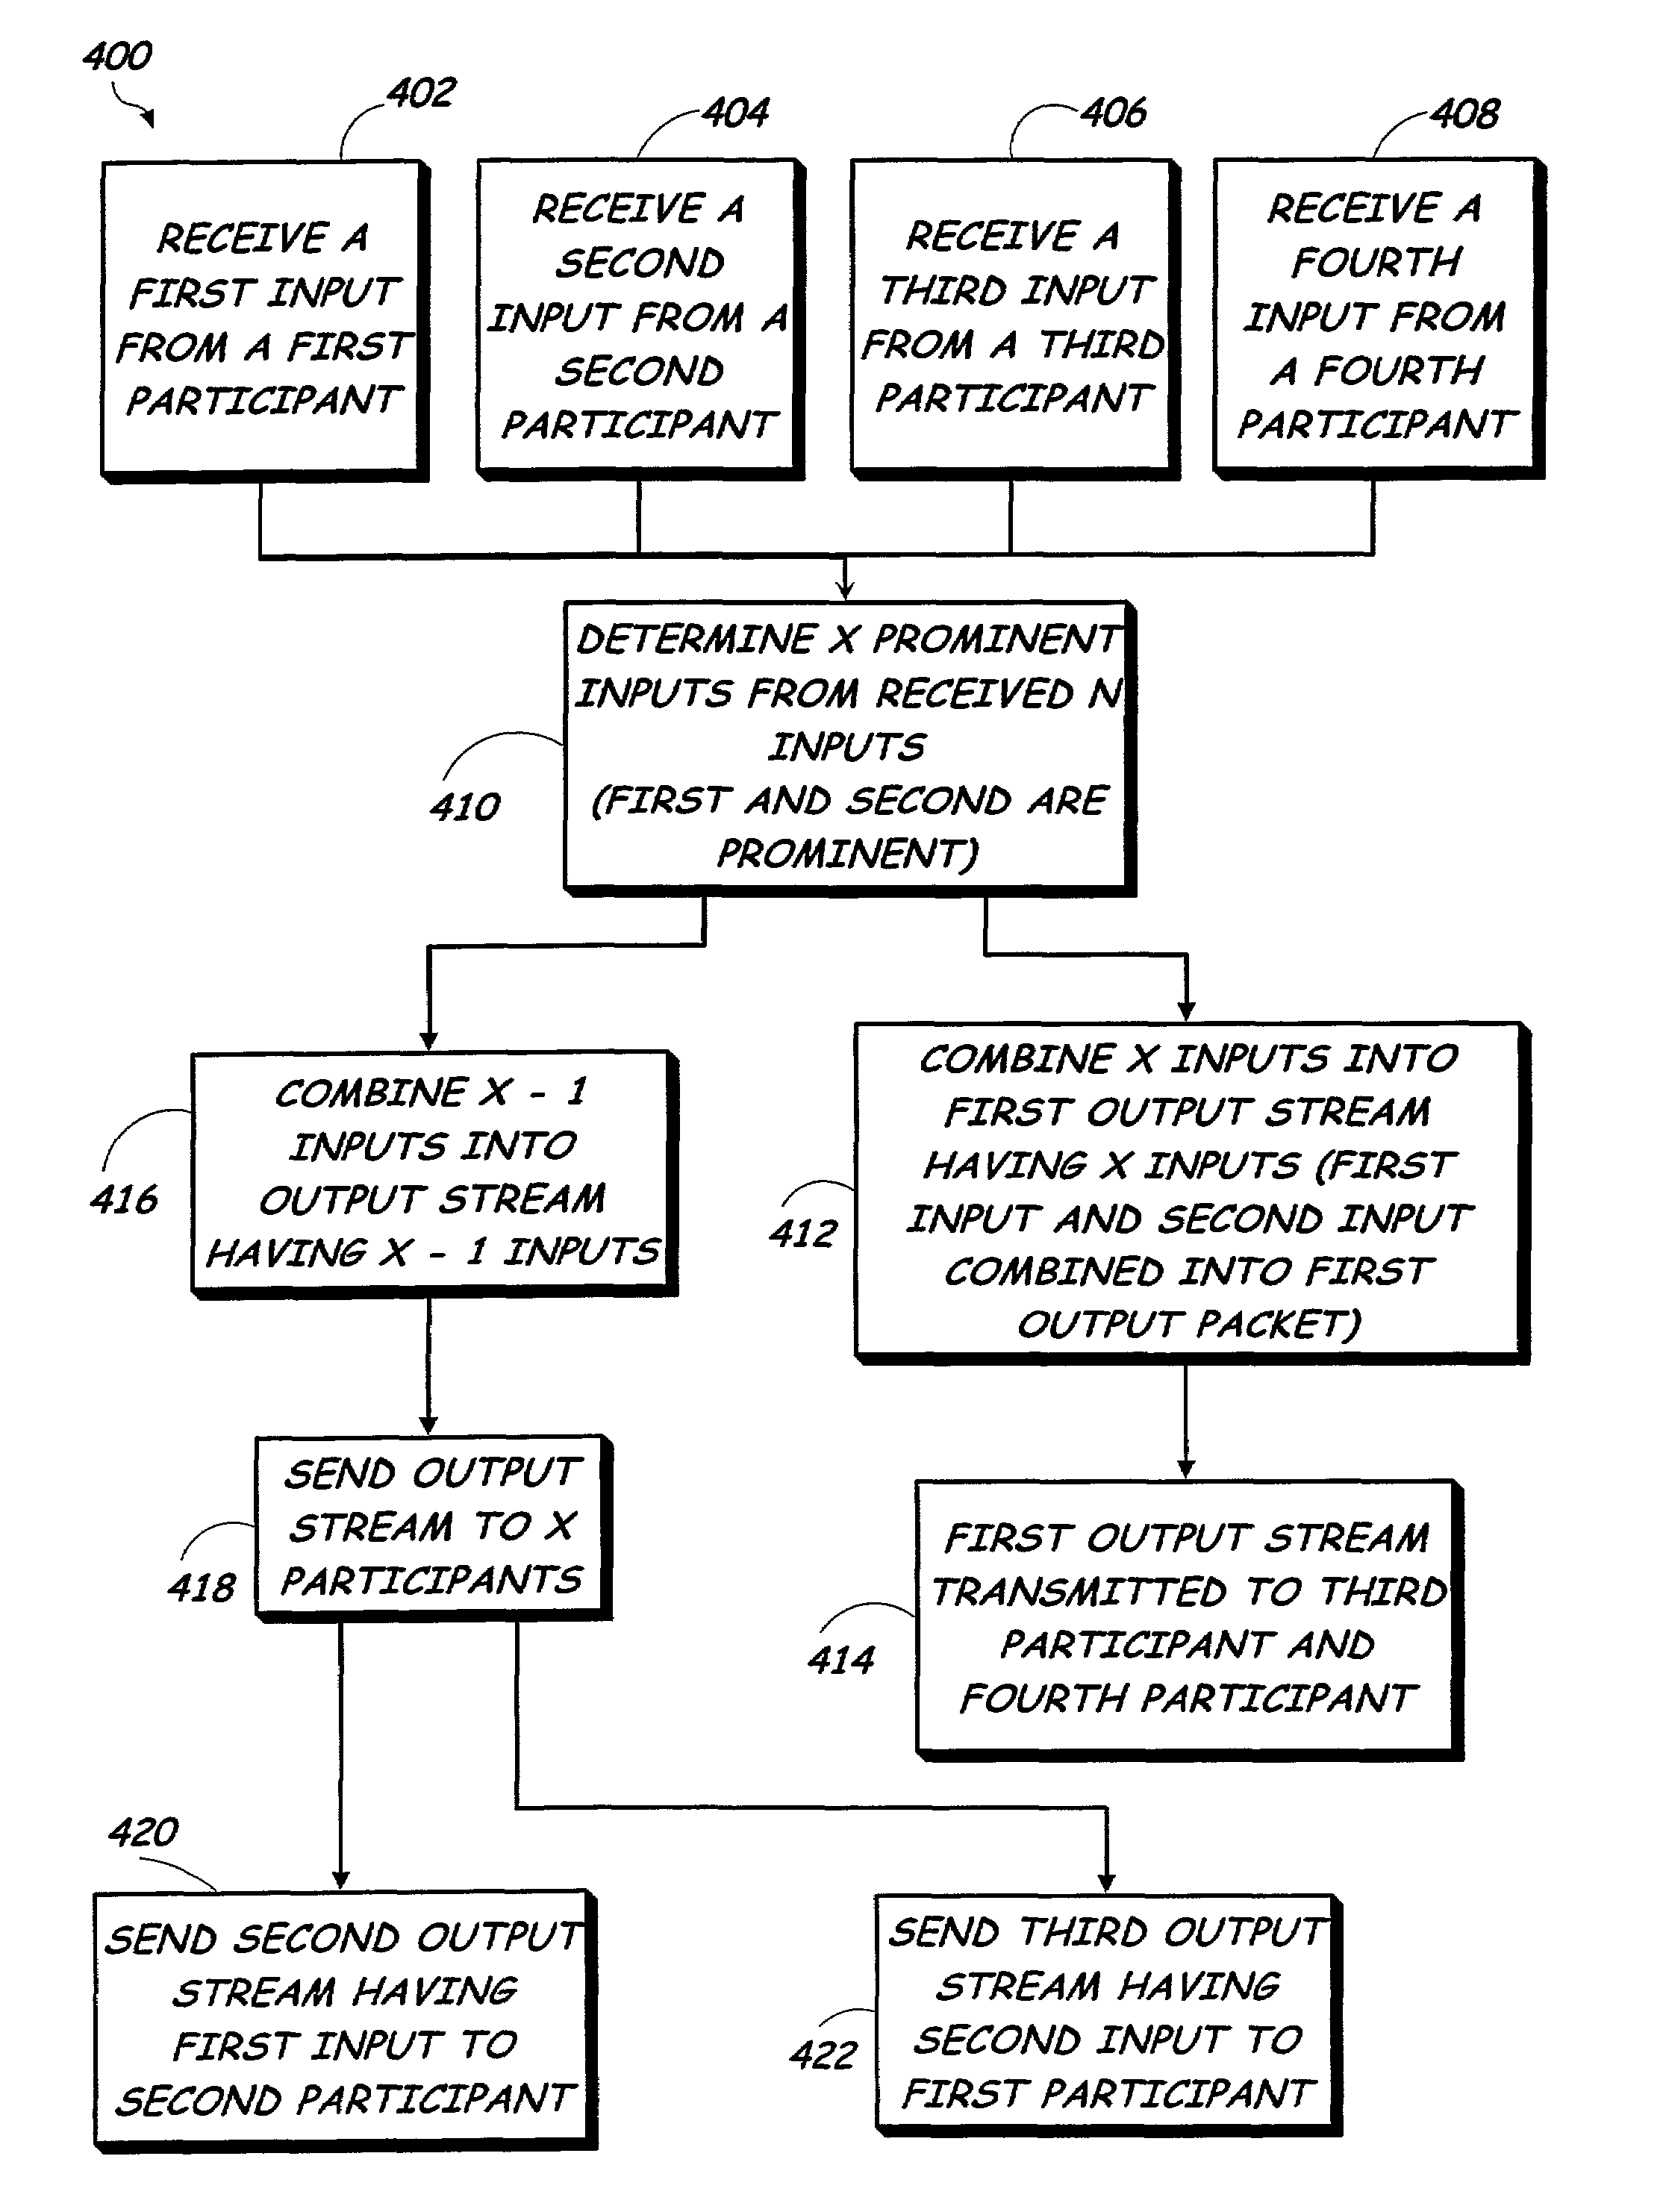 Method for background noise reduction and performance improvement in voice conferencing over packetized networks